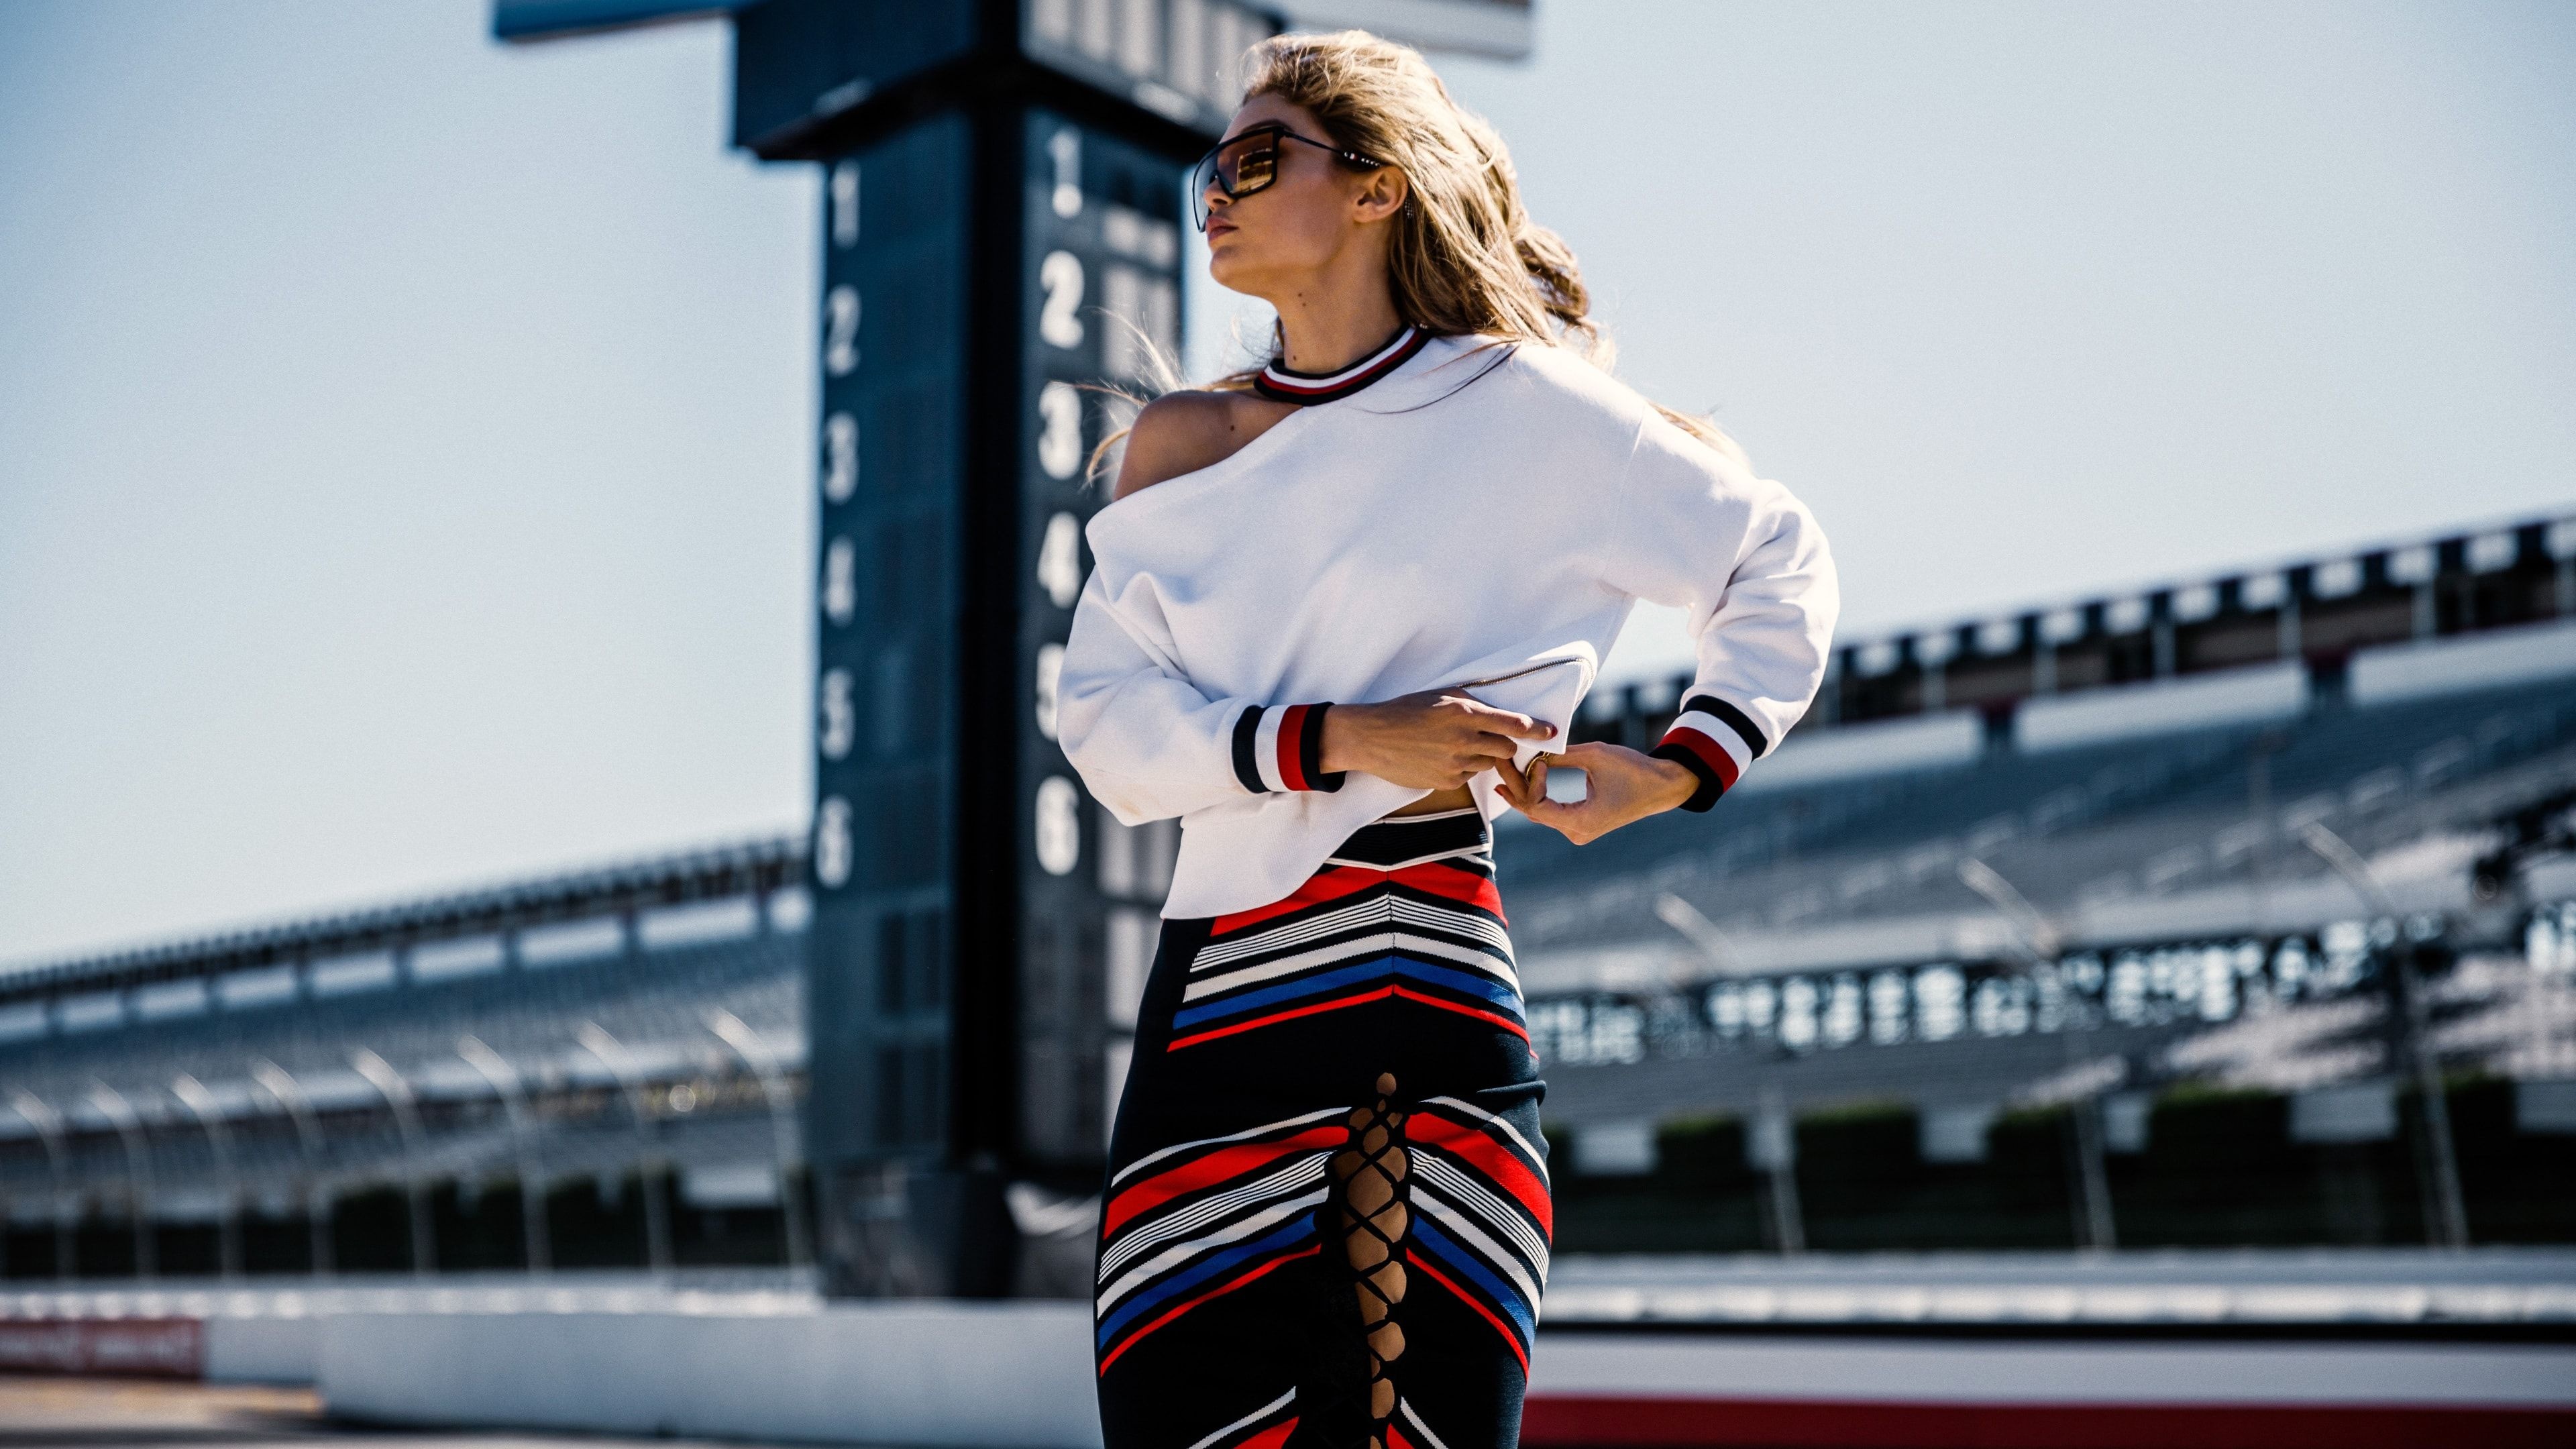 Tommy Hilfiger: Gigi Hadid, Collaboration inspired by the world of automobile racing. 3840x2160 4K Wallpaper.